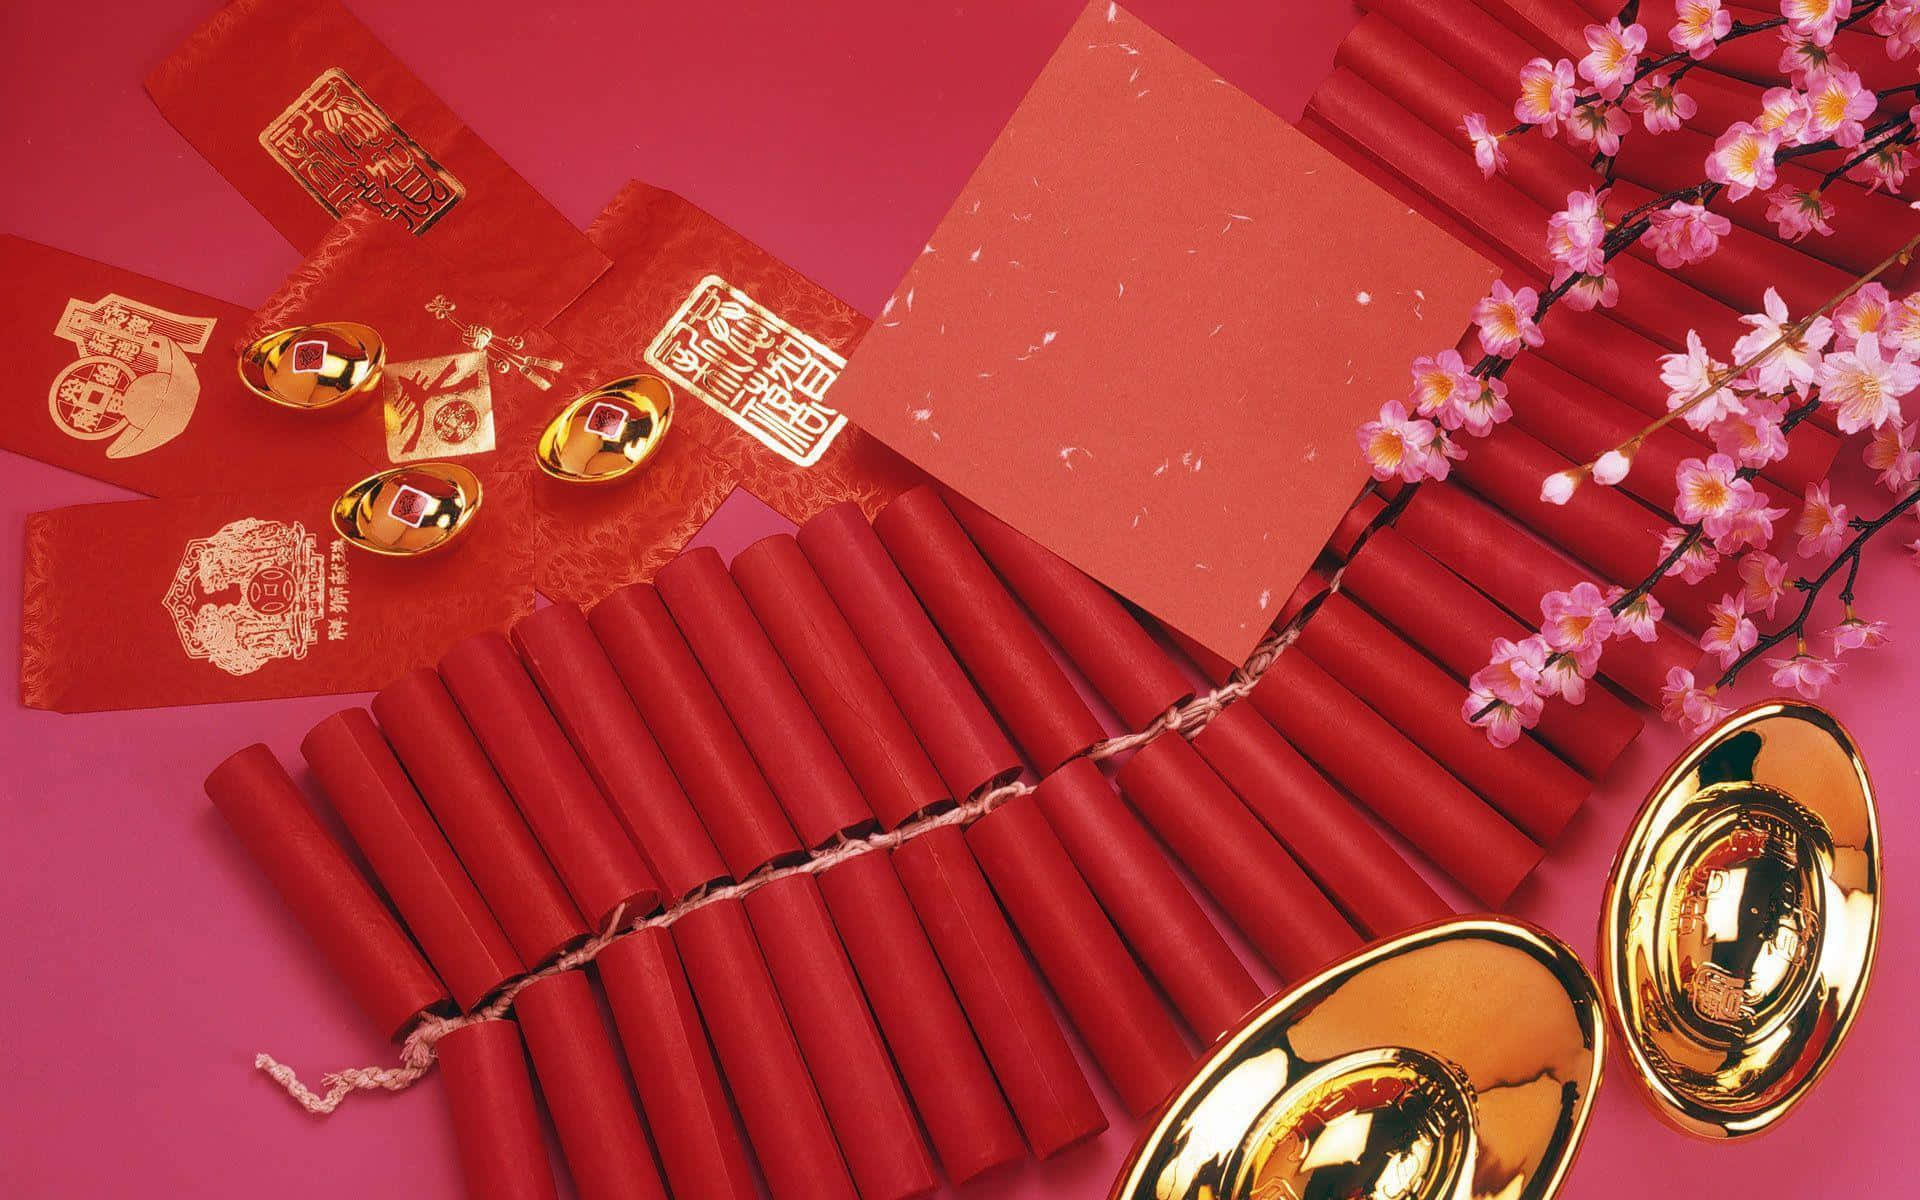 "Celebrating Chinese New Year with Fireworks, the Symbol of a Fresh Start"